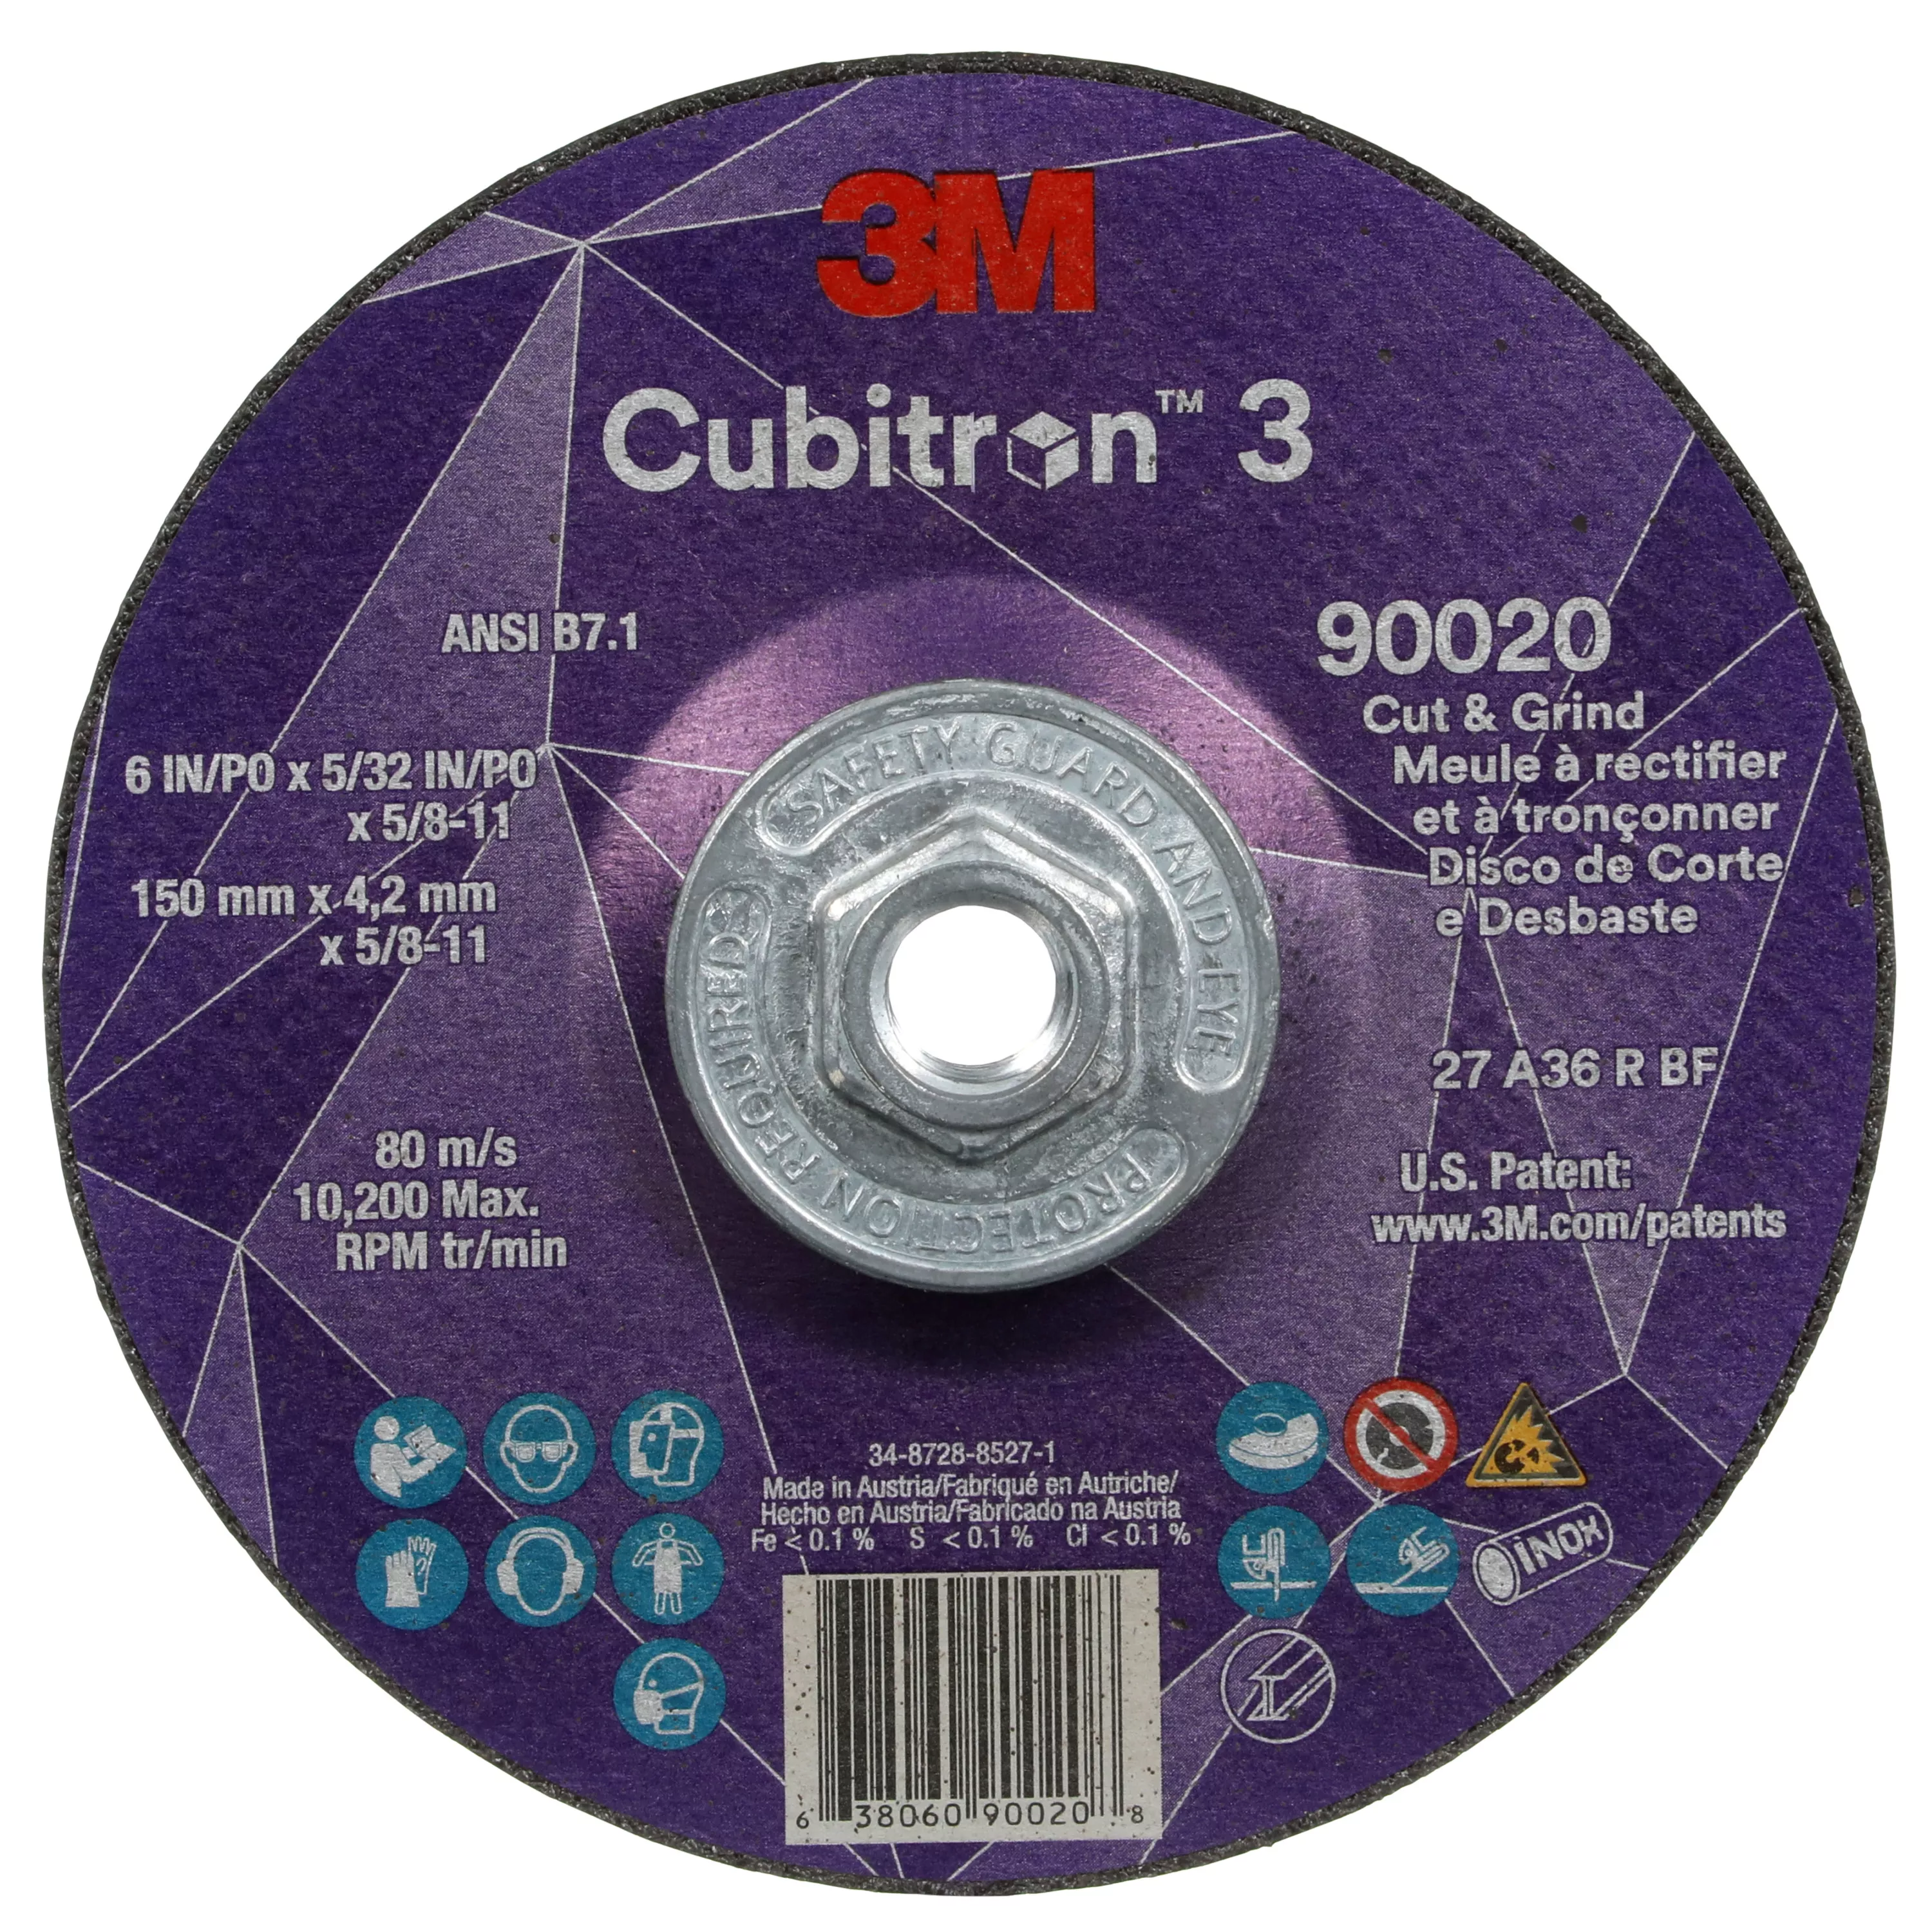 3M™ Cubitron™ 3 Cut and Grind Wheel, 90020, 36+, T27, 6 in x 5/32 in x
5/8 in-11 (150 x 4.2 mm x 5/8-11 in), ANSI, 10 ea/Case